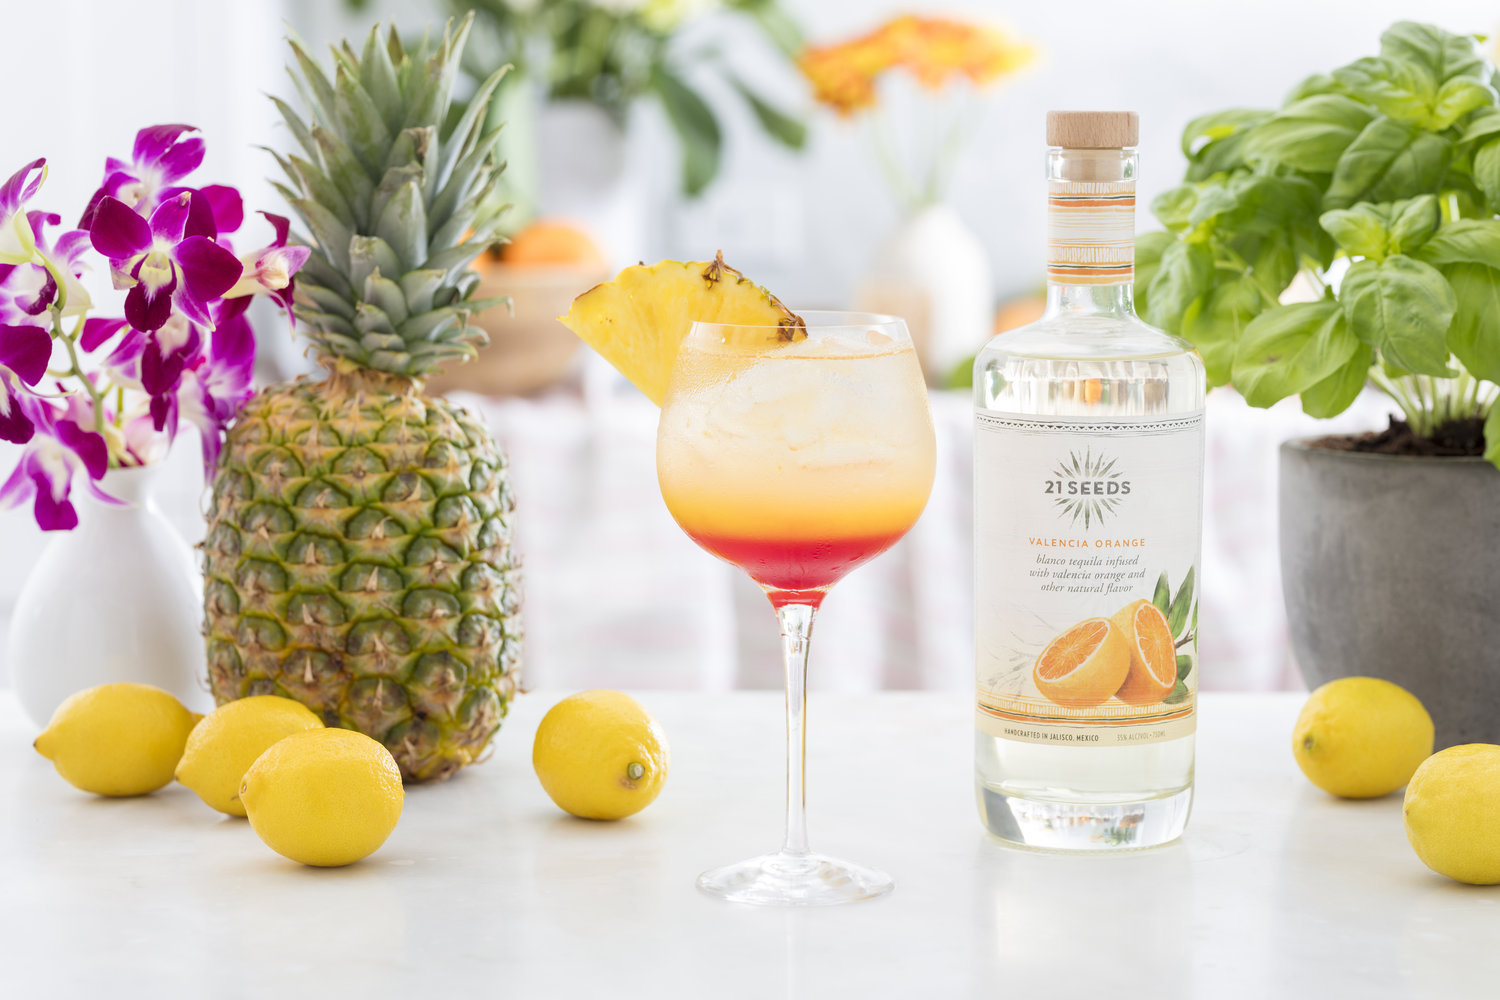 Cocktails You Ll Want To Have On National Tequila Day Off The Mrkt,Best Cheap Champagne To Pop